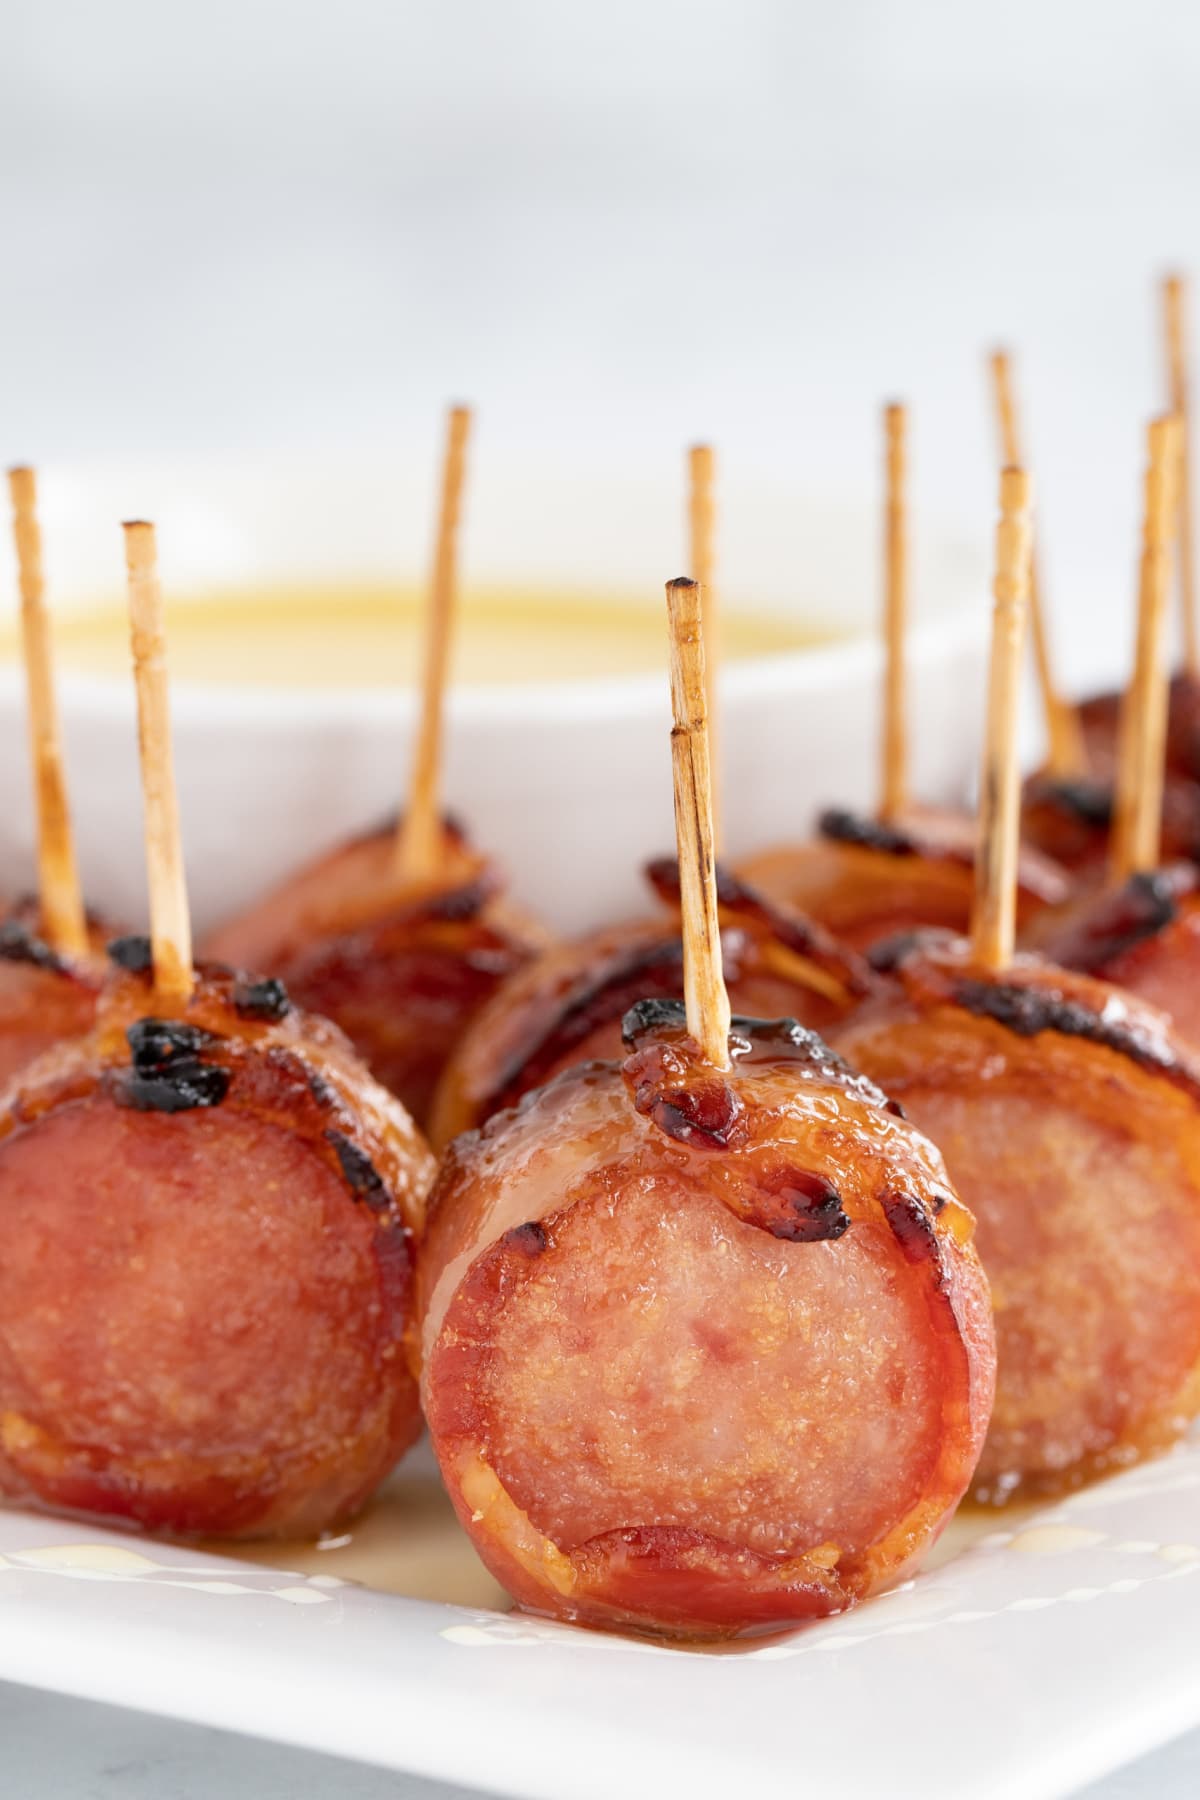 Bacon wrapped sausage up close